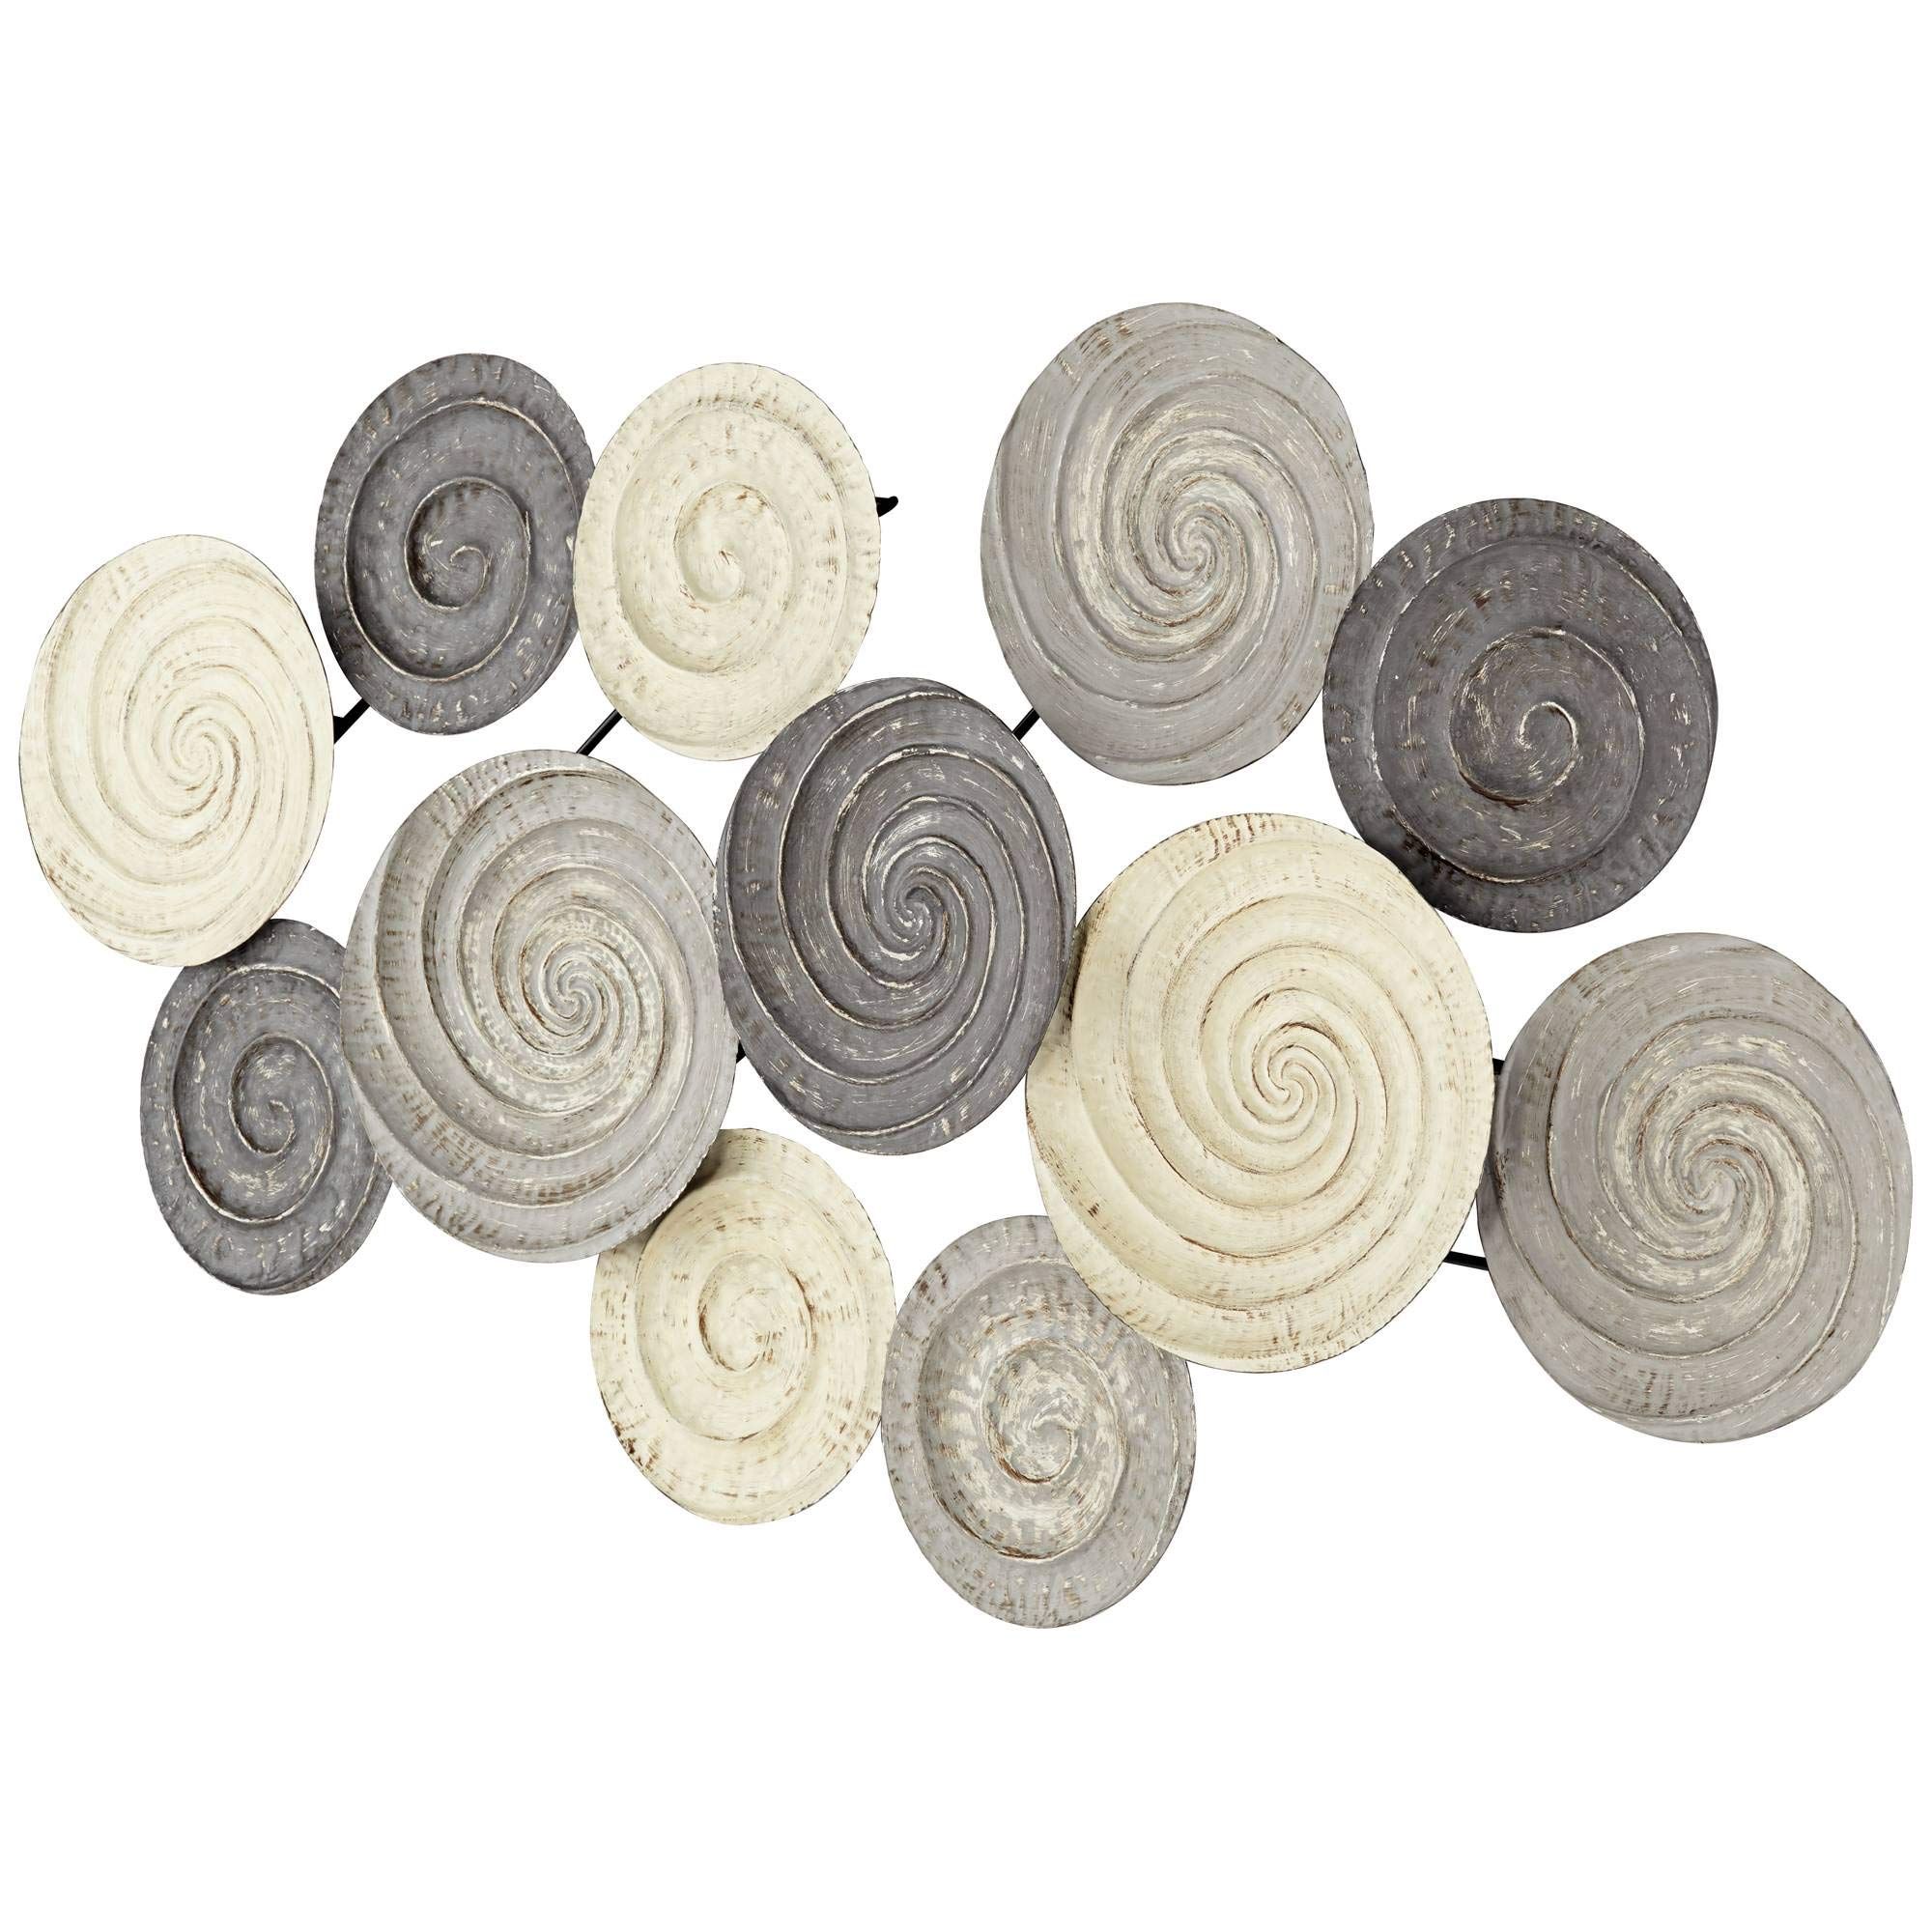 Amazon: Newhill Designs Spiral Circles 49 1/2" Wide Painted Modern  Metal Wall Art : Home & Kitchen With Regard To Recent Spiral Circles Wall Art (View 2 of 15)